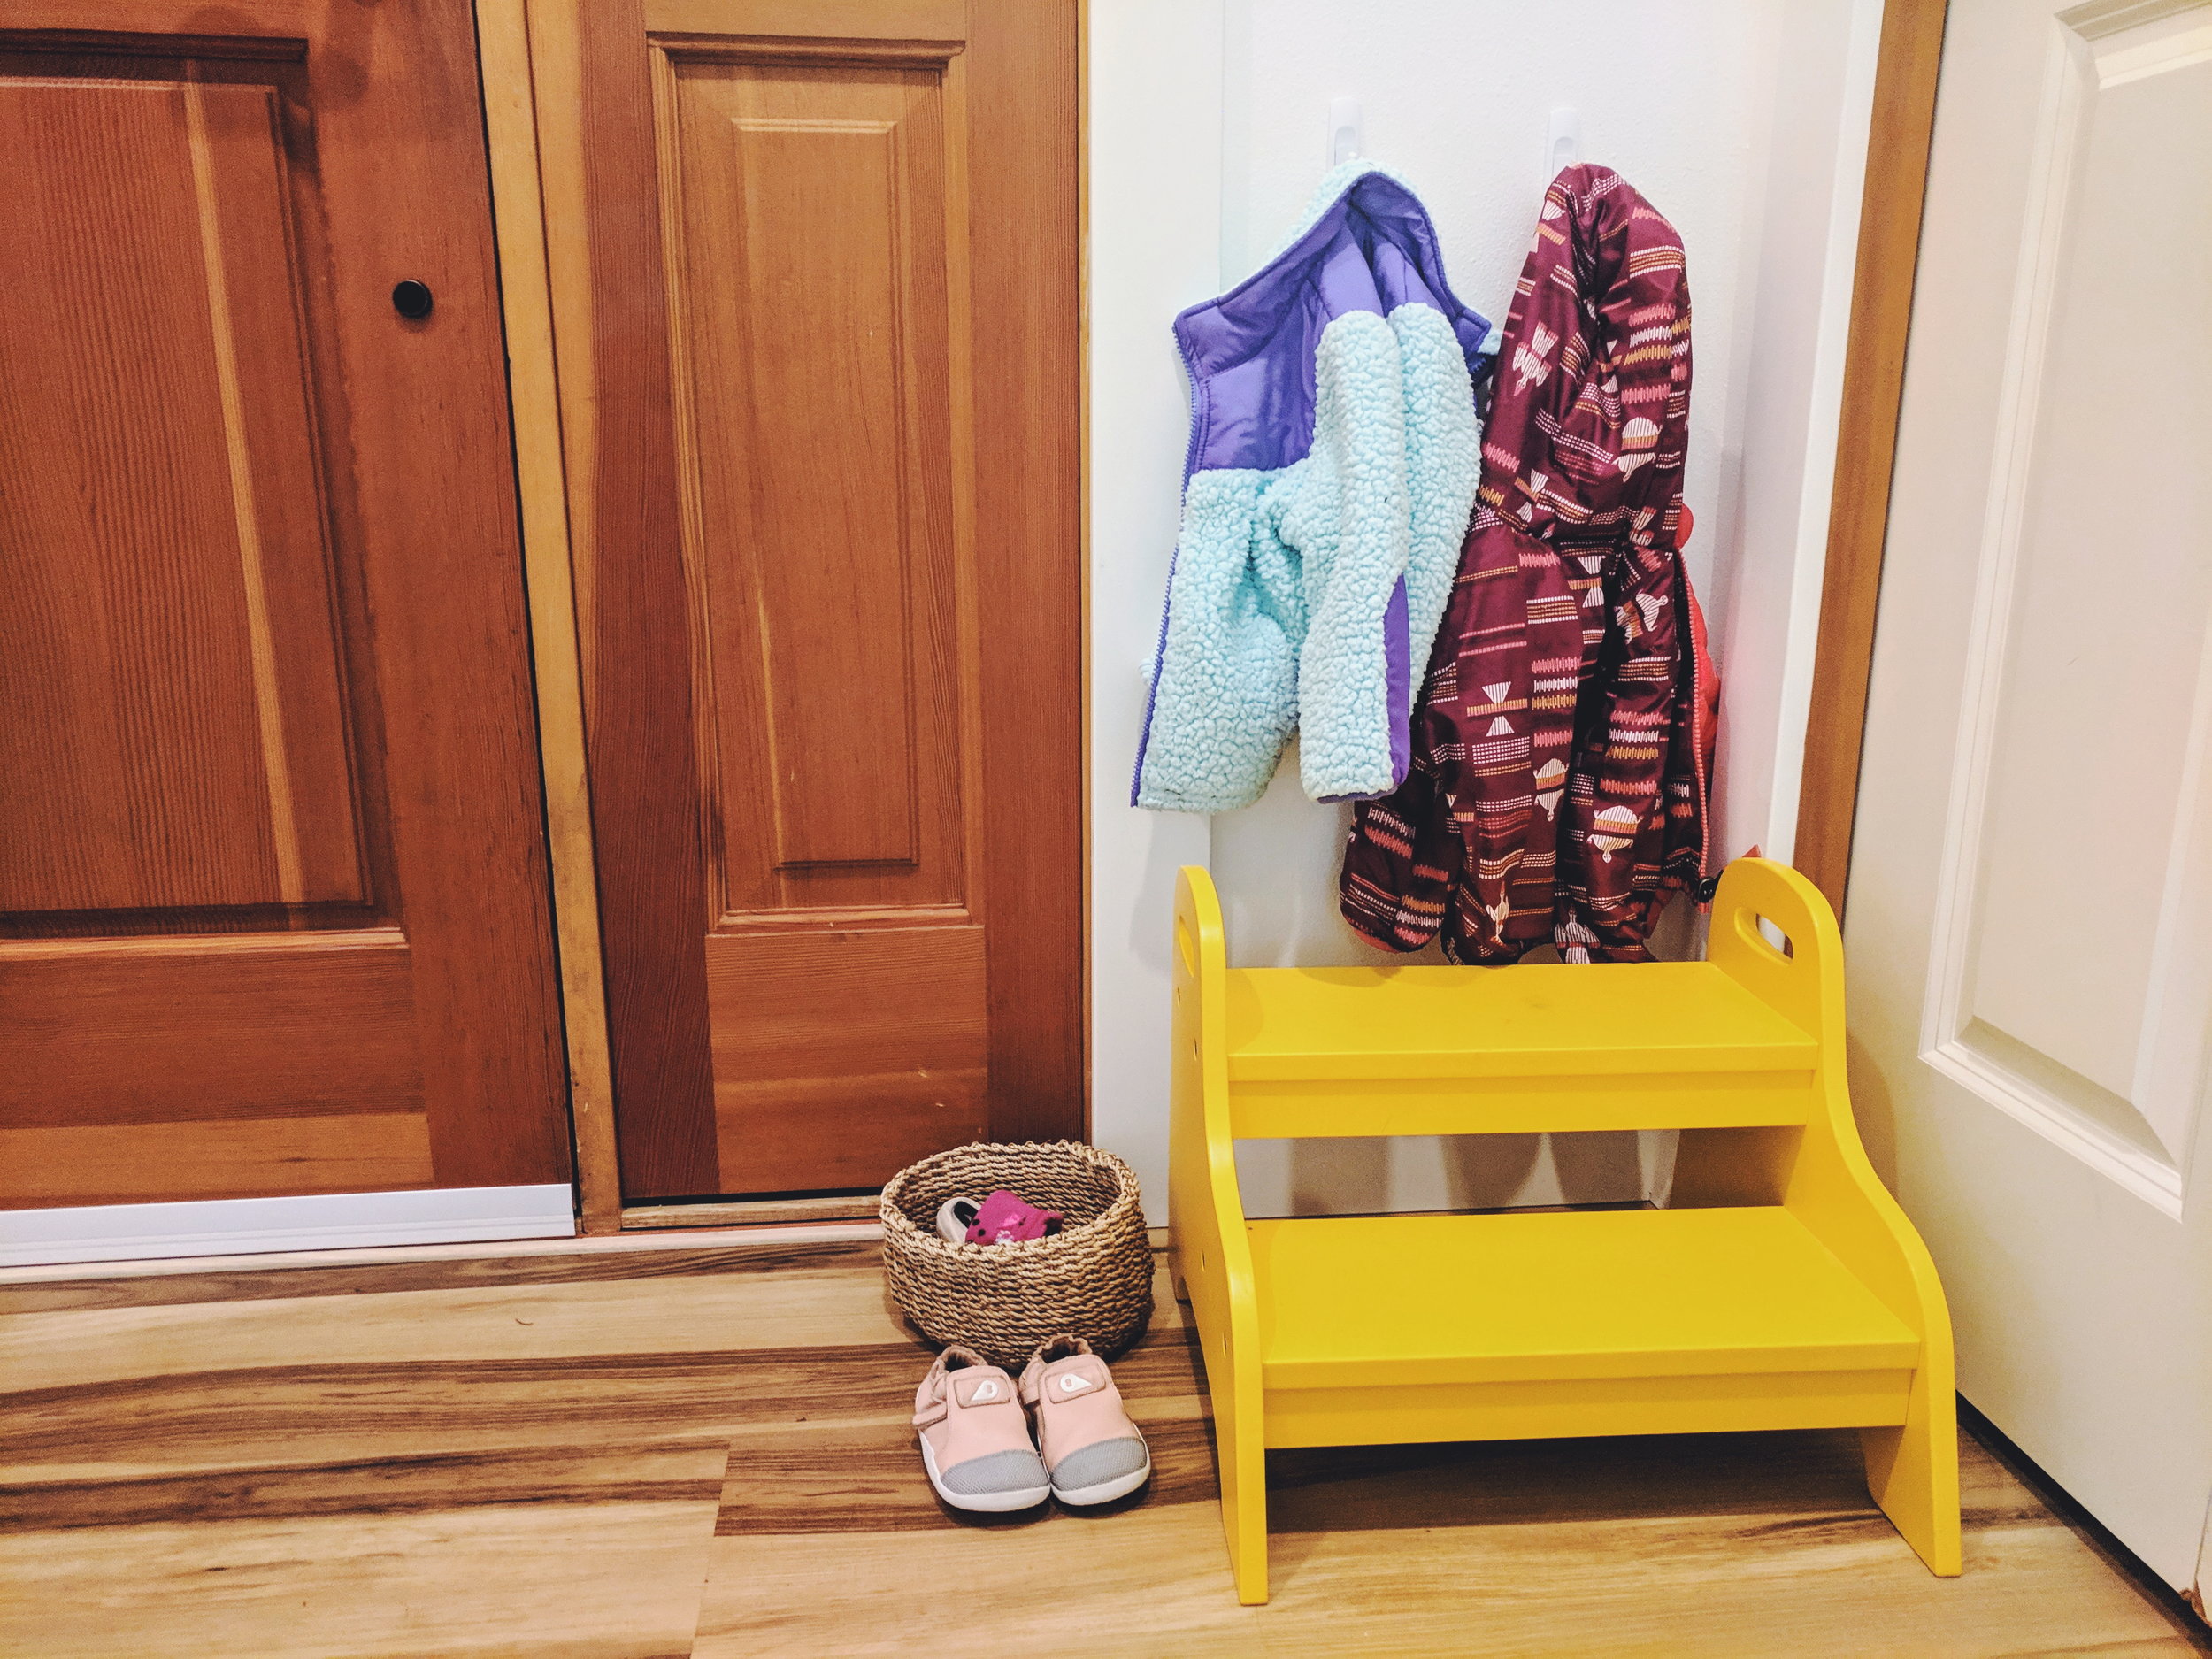 What is Montessori for Babies and Toddlers? — Montessori in Real Life